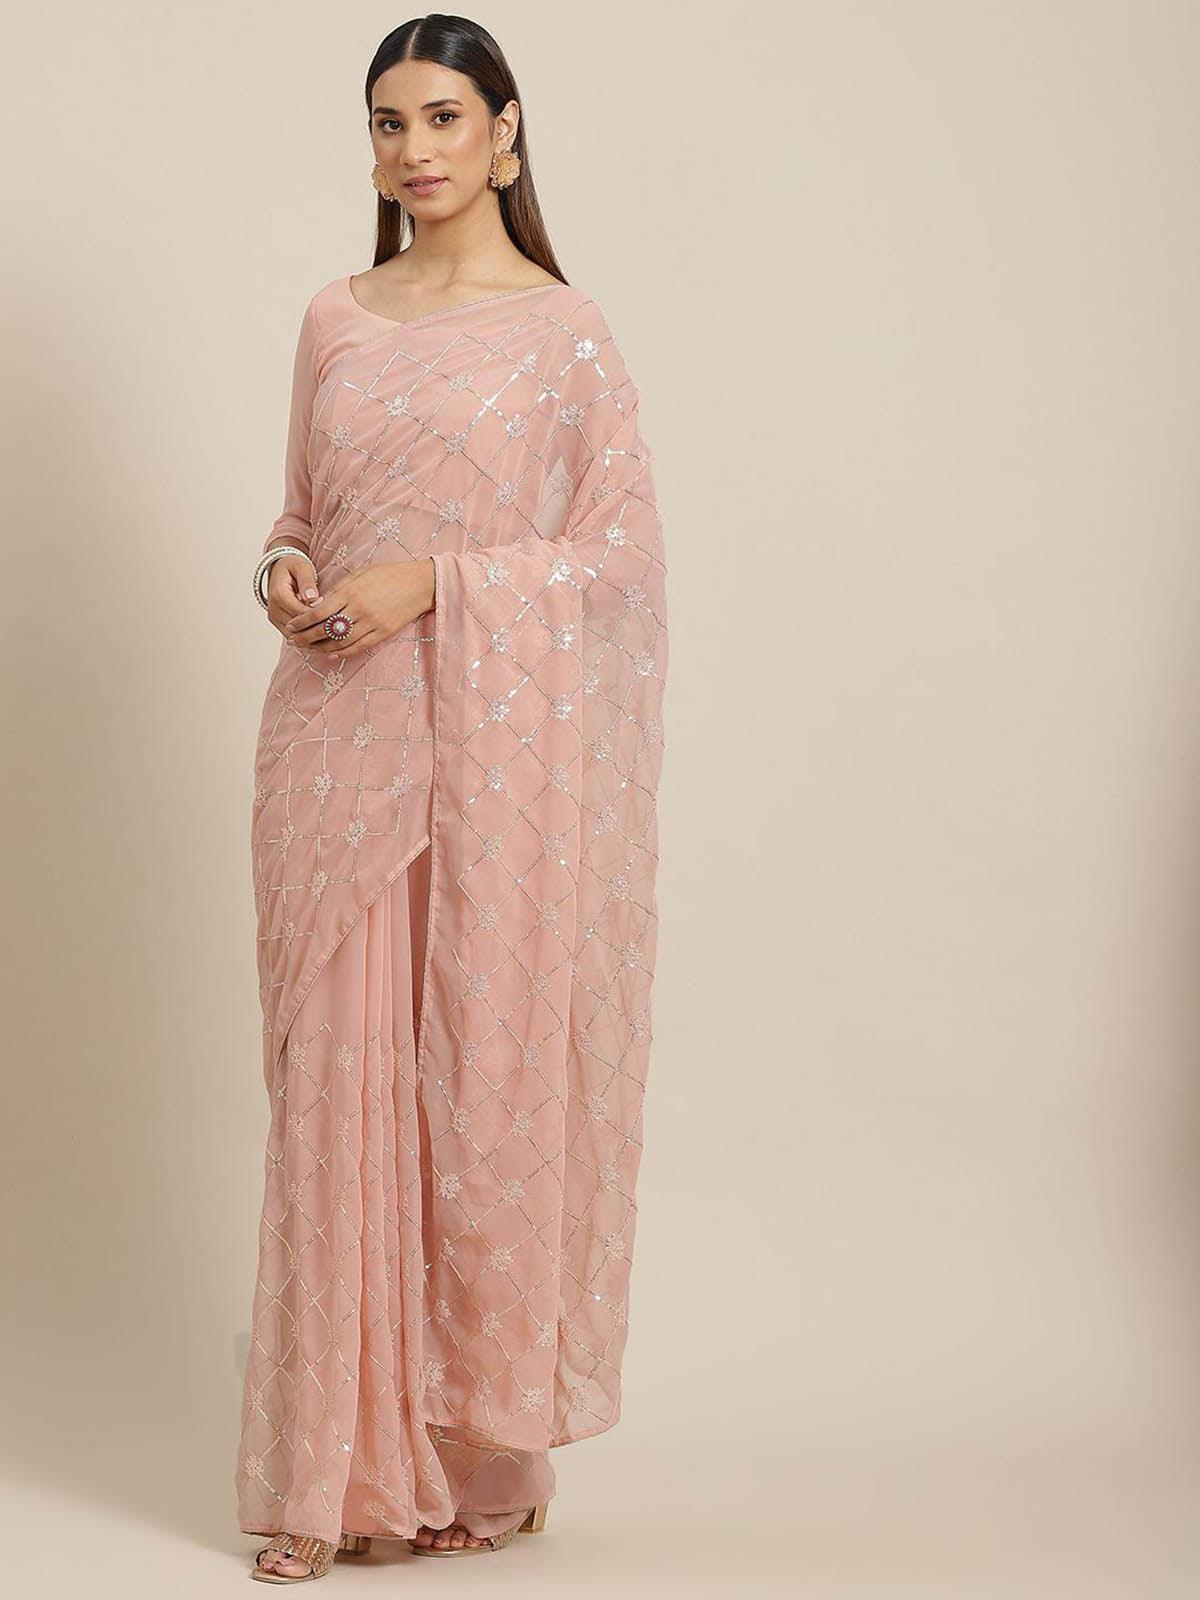 Peach Georgette Embroidered Saree With Blouse - Odette